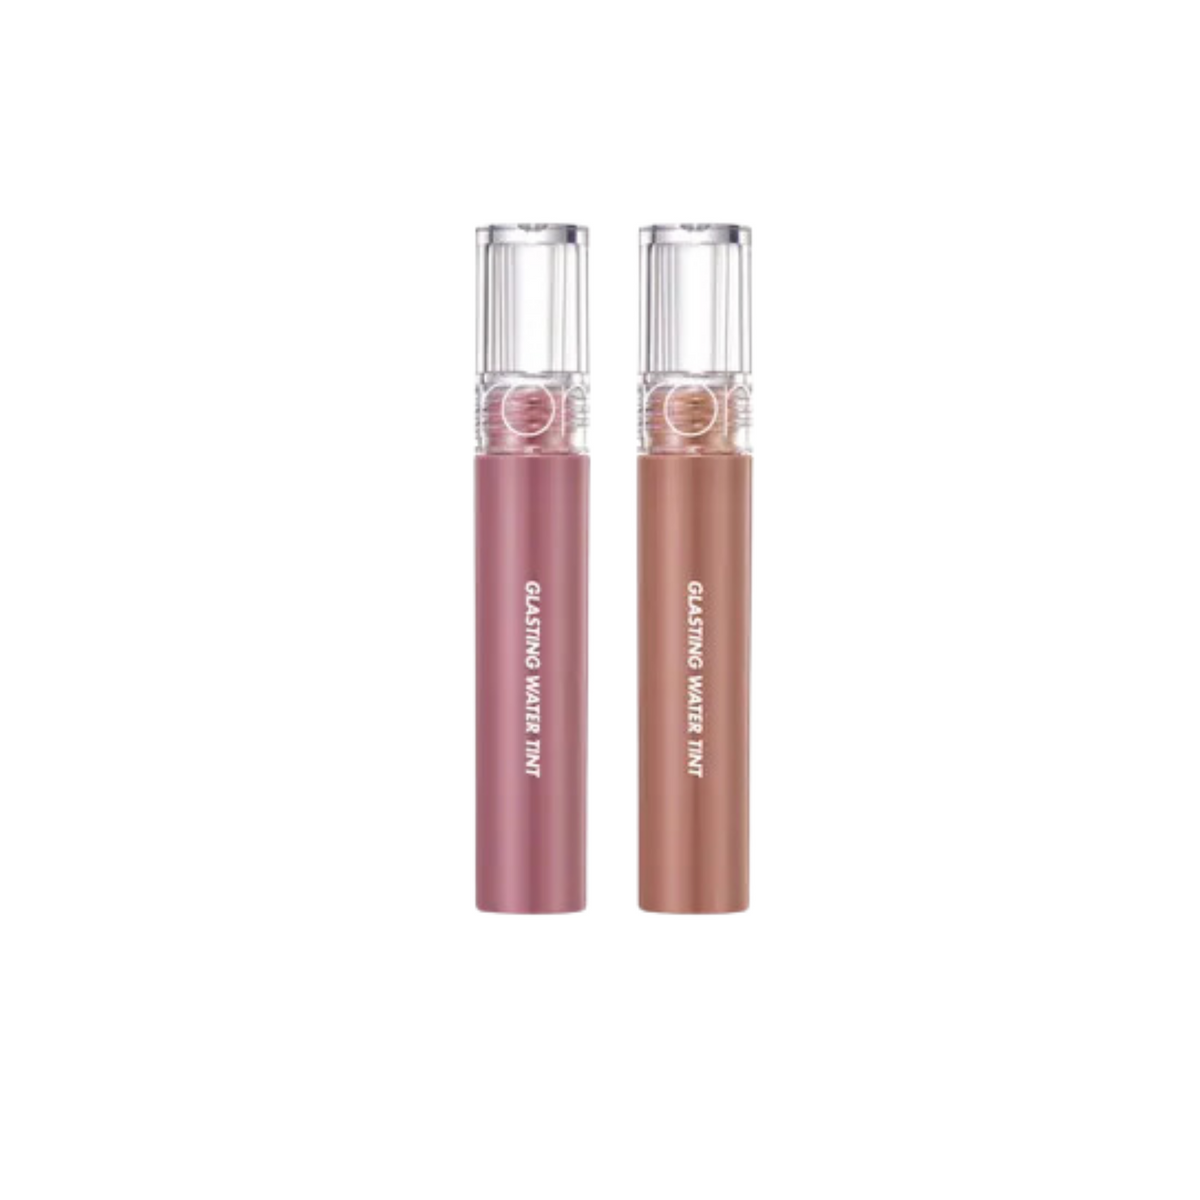 ROM&ND Glasting Water Tint Sunset Series 2 shades (4g)